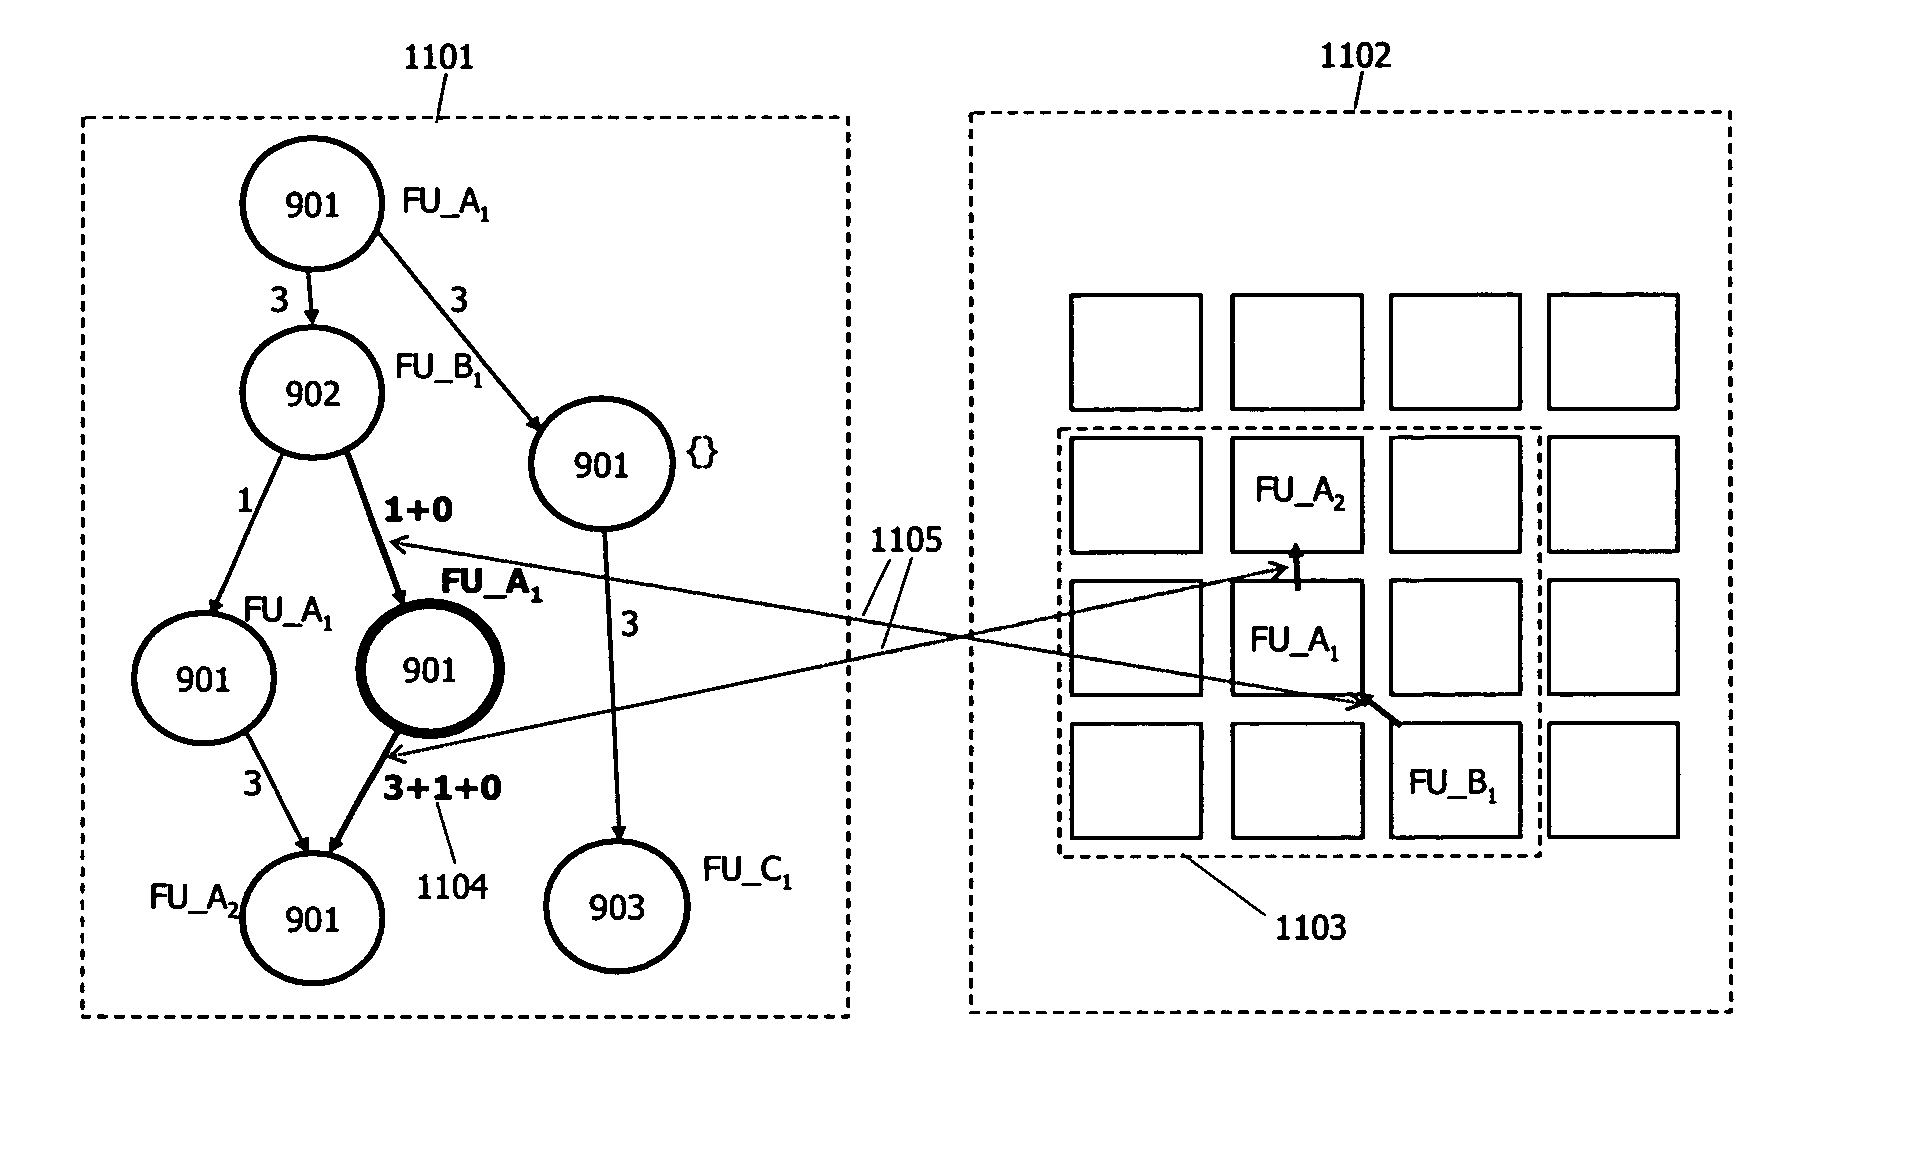 Generating code for a configurable microprocessor